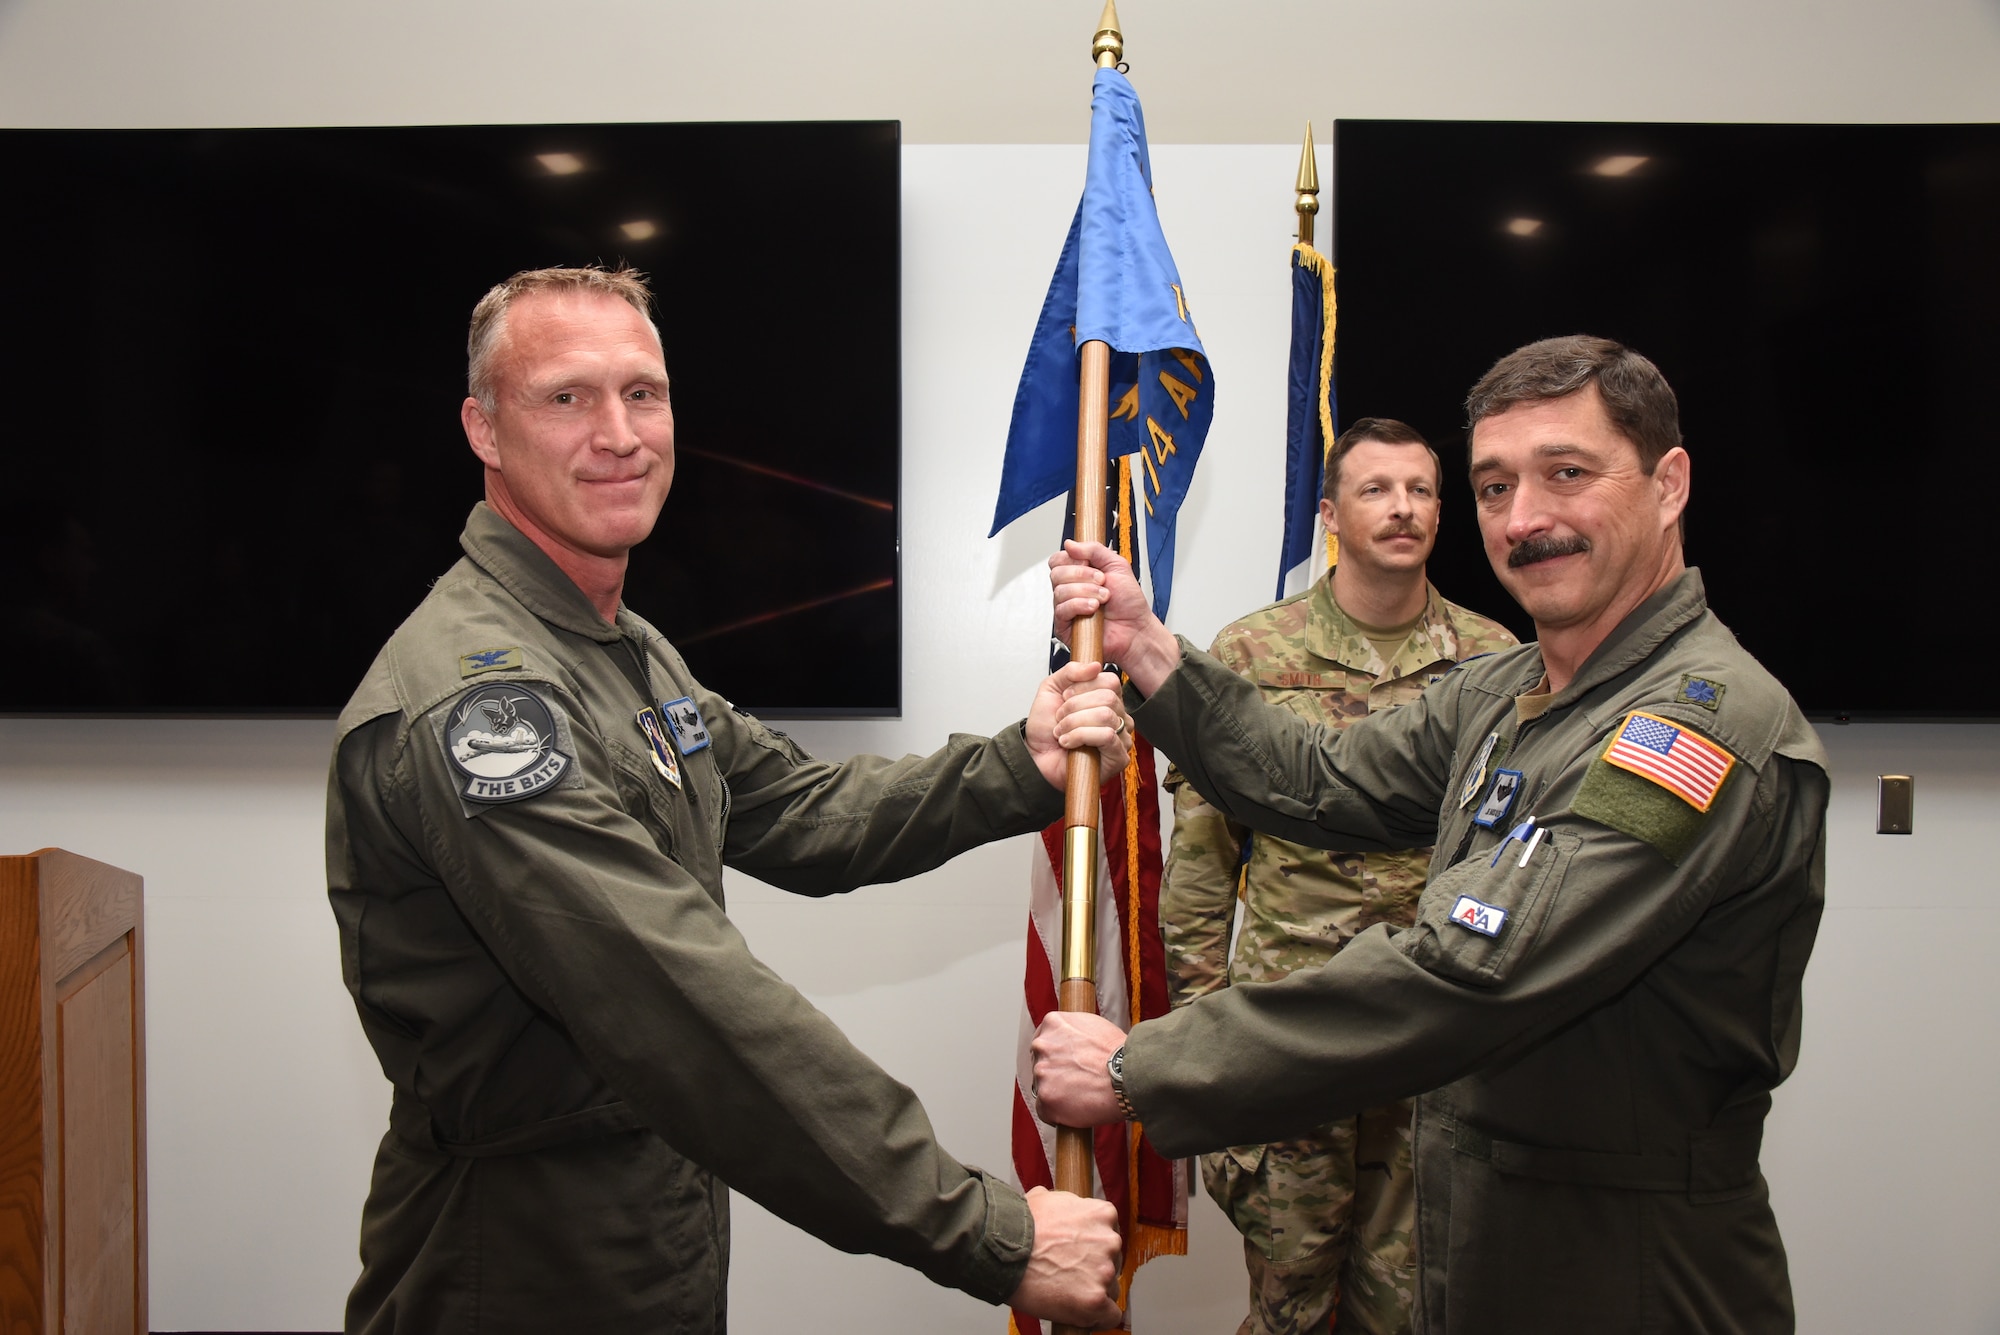 Lt. Col. Joseph Bousquet, right, accepts the unit’s guidon from Col. Todd Miller